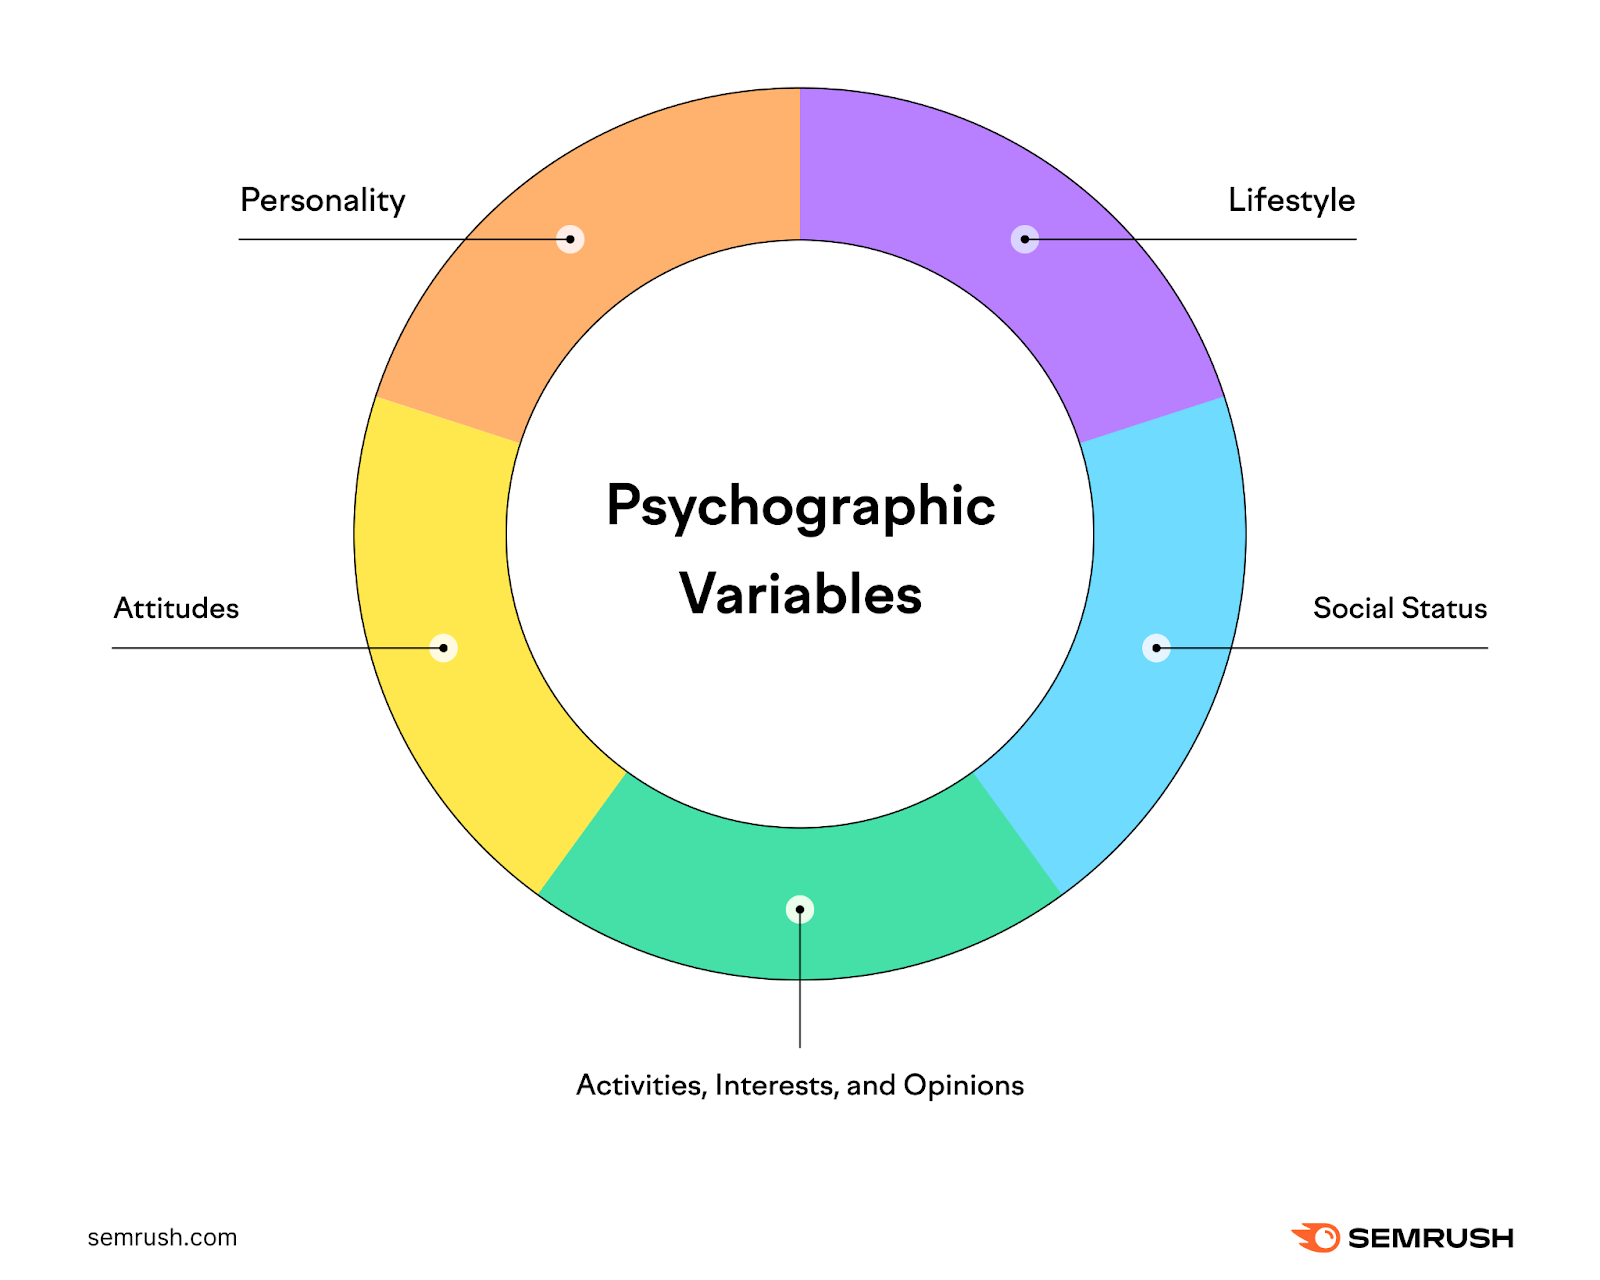 Psychographic variables include personality, lifestyle, social status, attitudes, activities, interests, and opinions